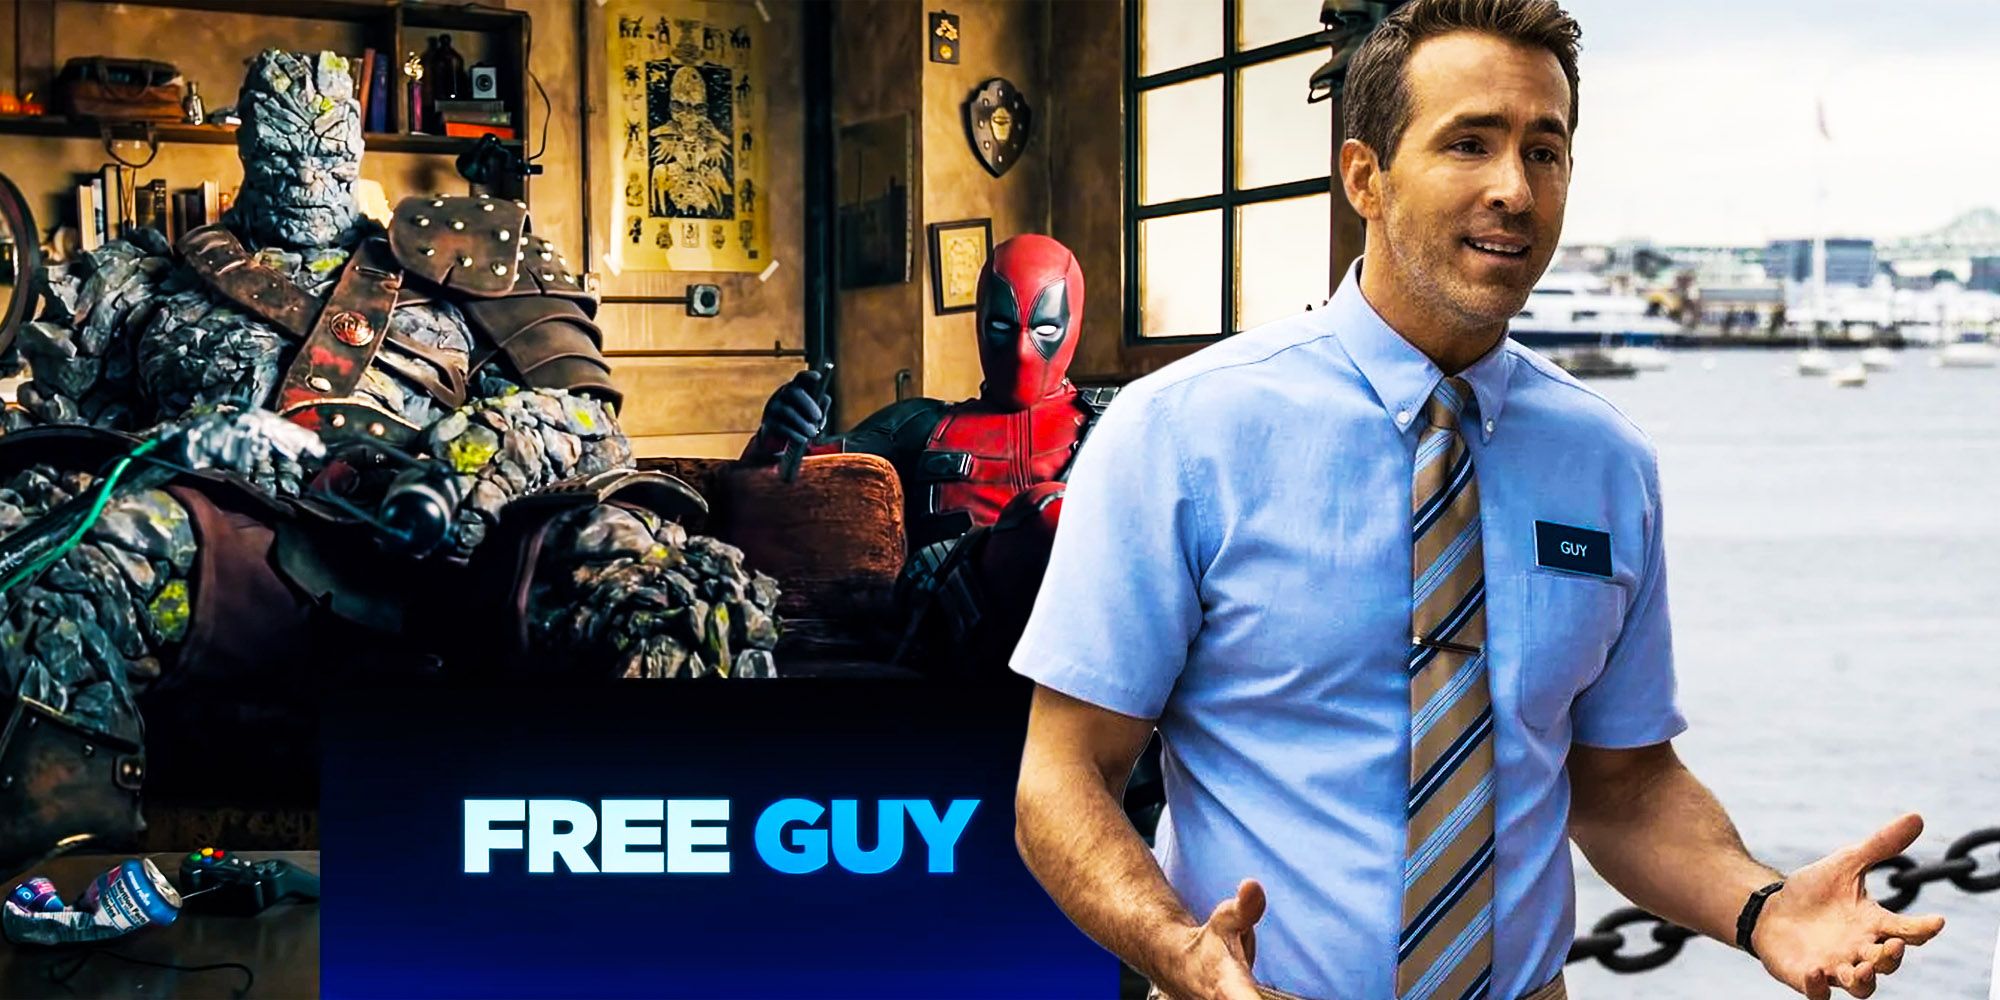 Deadpool Makes Official MCU Debut With Korg In Free Guy Trailer Reaction  Video